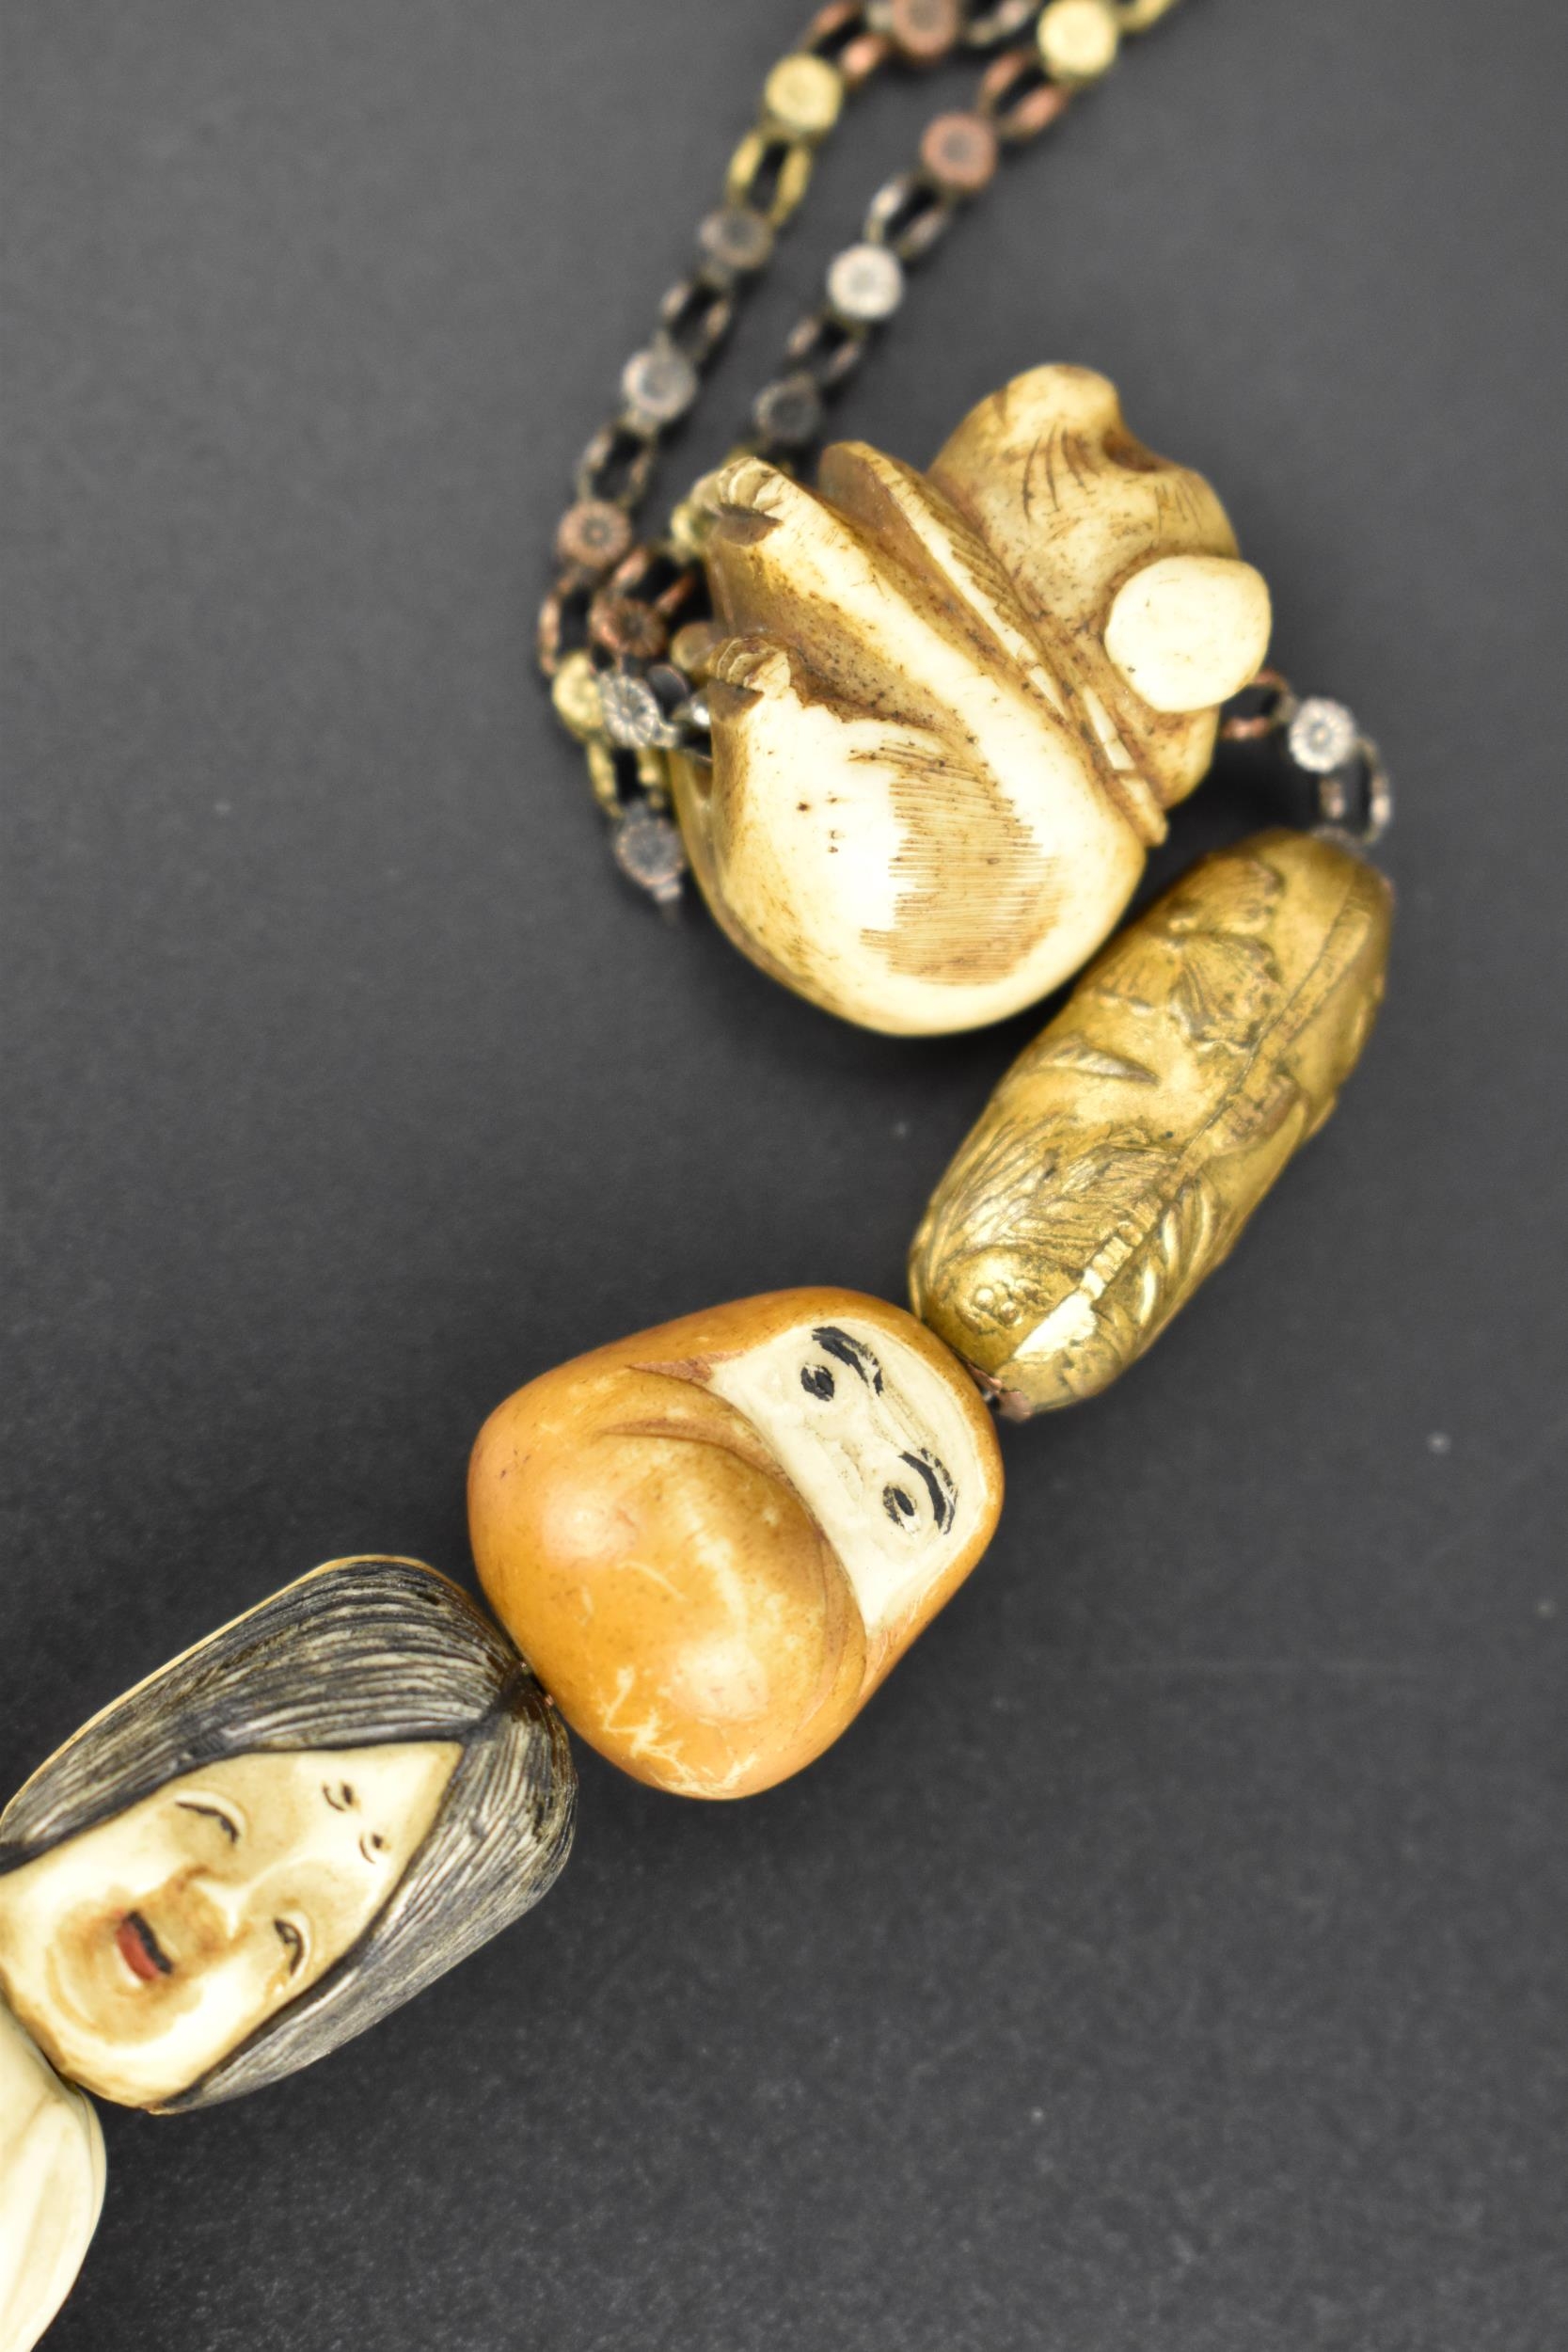 A 19th century Japanese ojime bead necklace, with carved ivory, bone, and metal ojimes, modelled - Bild 6 aus 7